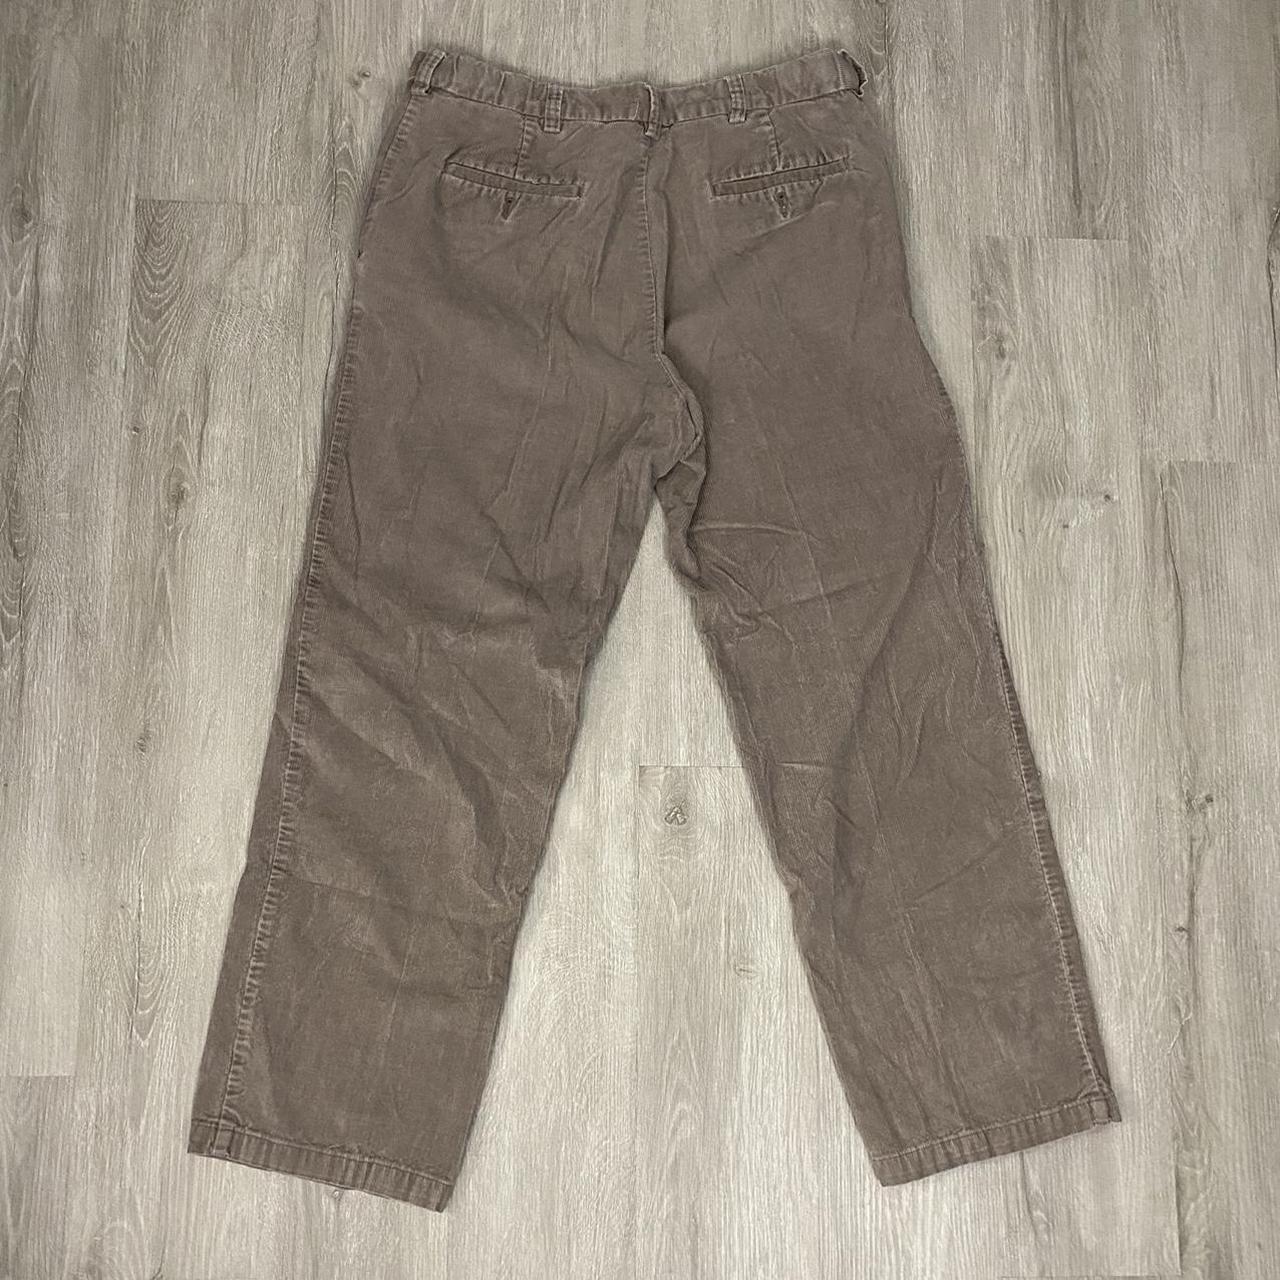 Product Image 1 - Vintage corduroy pants 34x29
In great